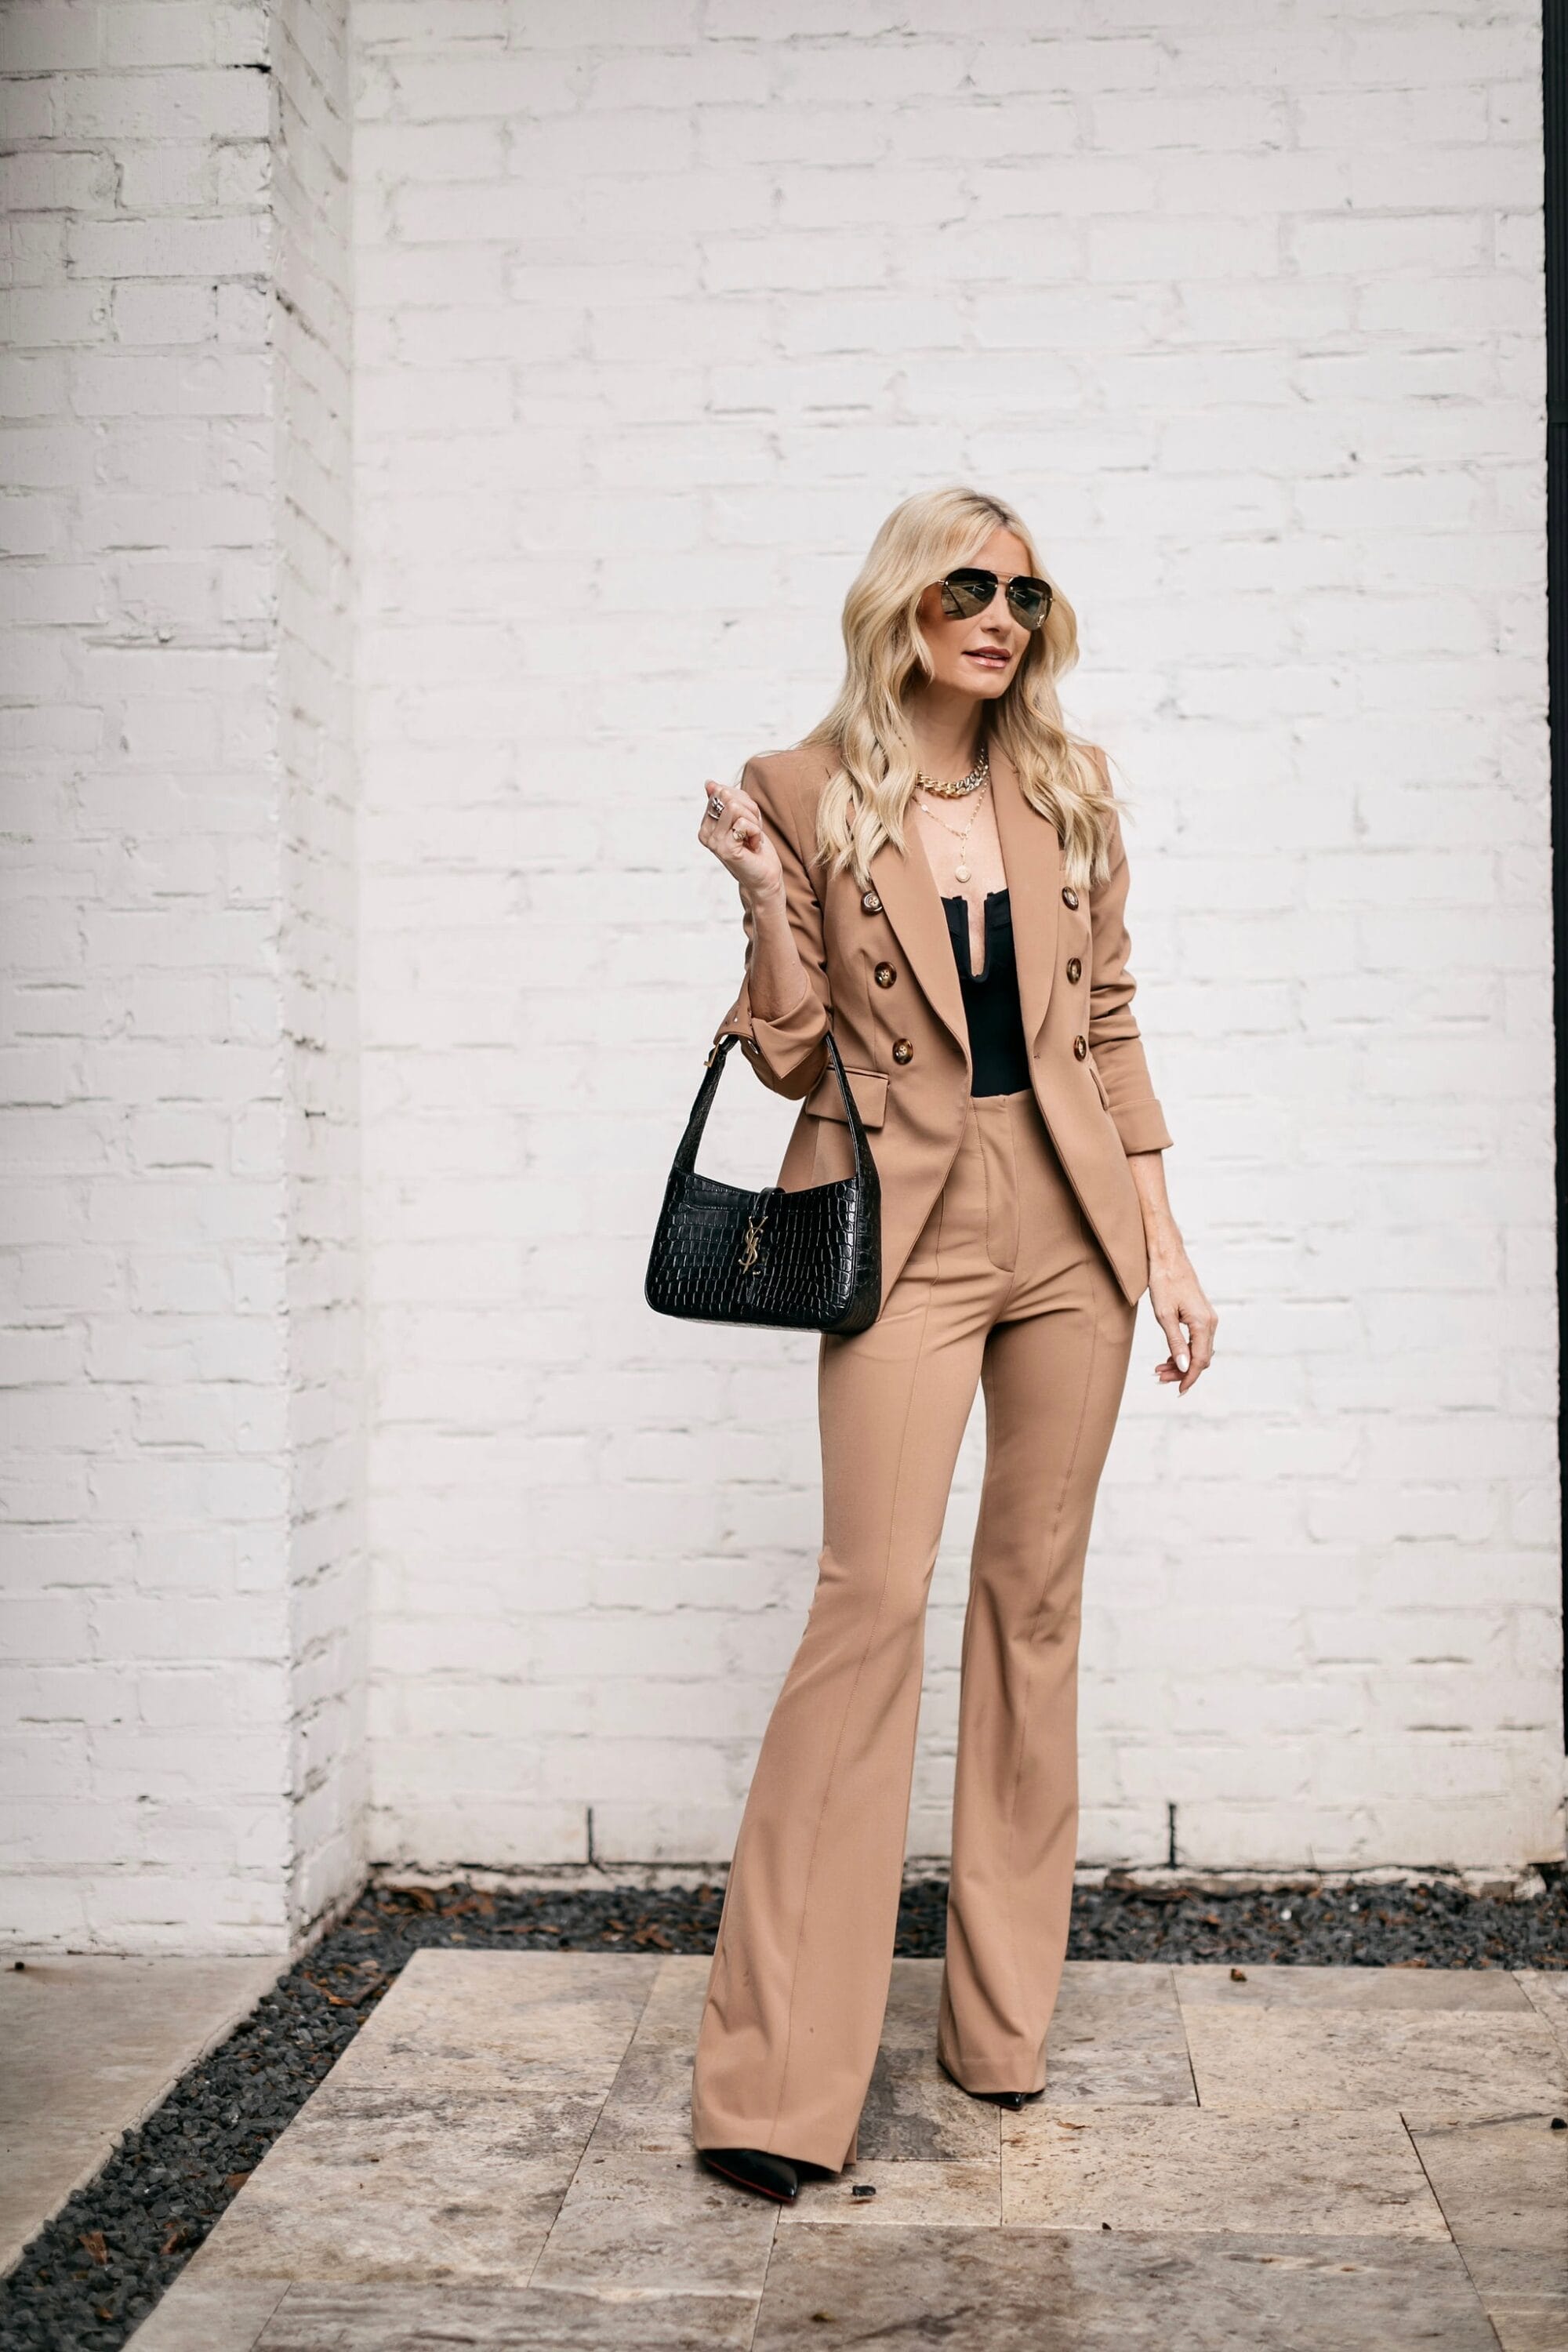 Over 40 Fashion Influencer wearing azariah pintuck pants with camel blazer and black bodysuit as part of her fall capsule wardrobe for 2022.